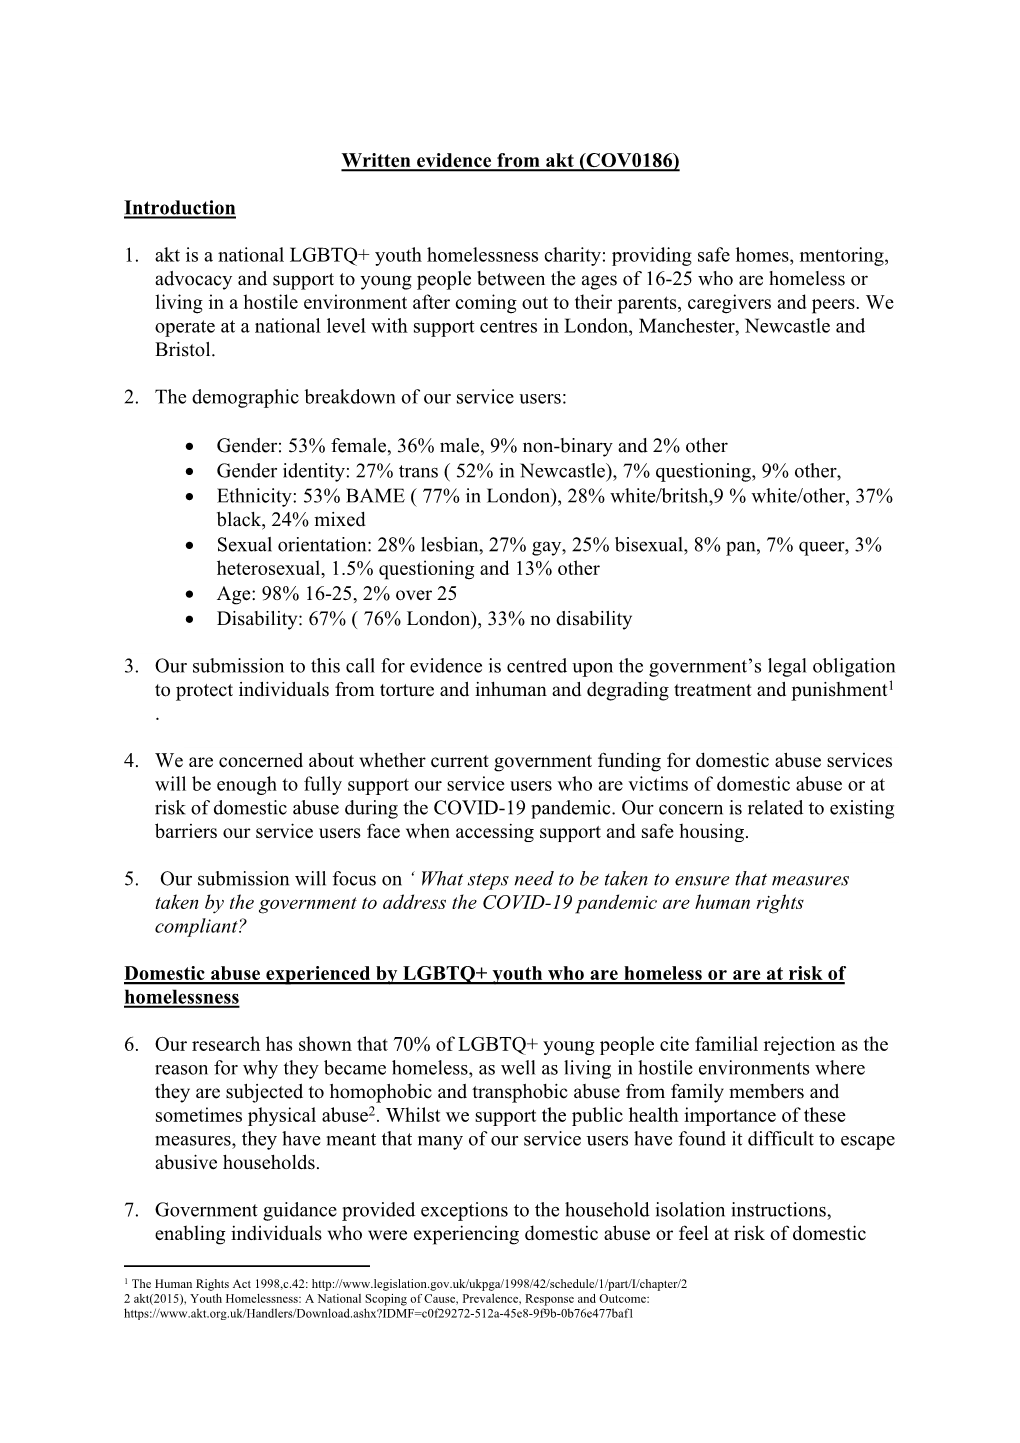 Written Evidence from Akt (COV0186) Introduction 1. Akt Is a National LGBTQ+ Youth Homelessness Charity